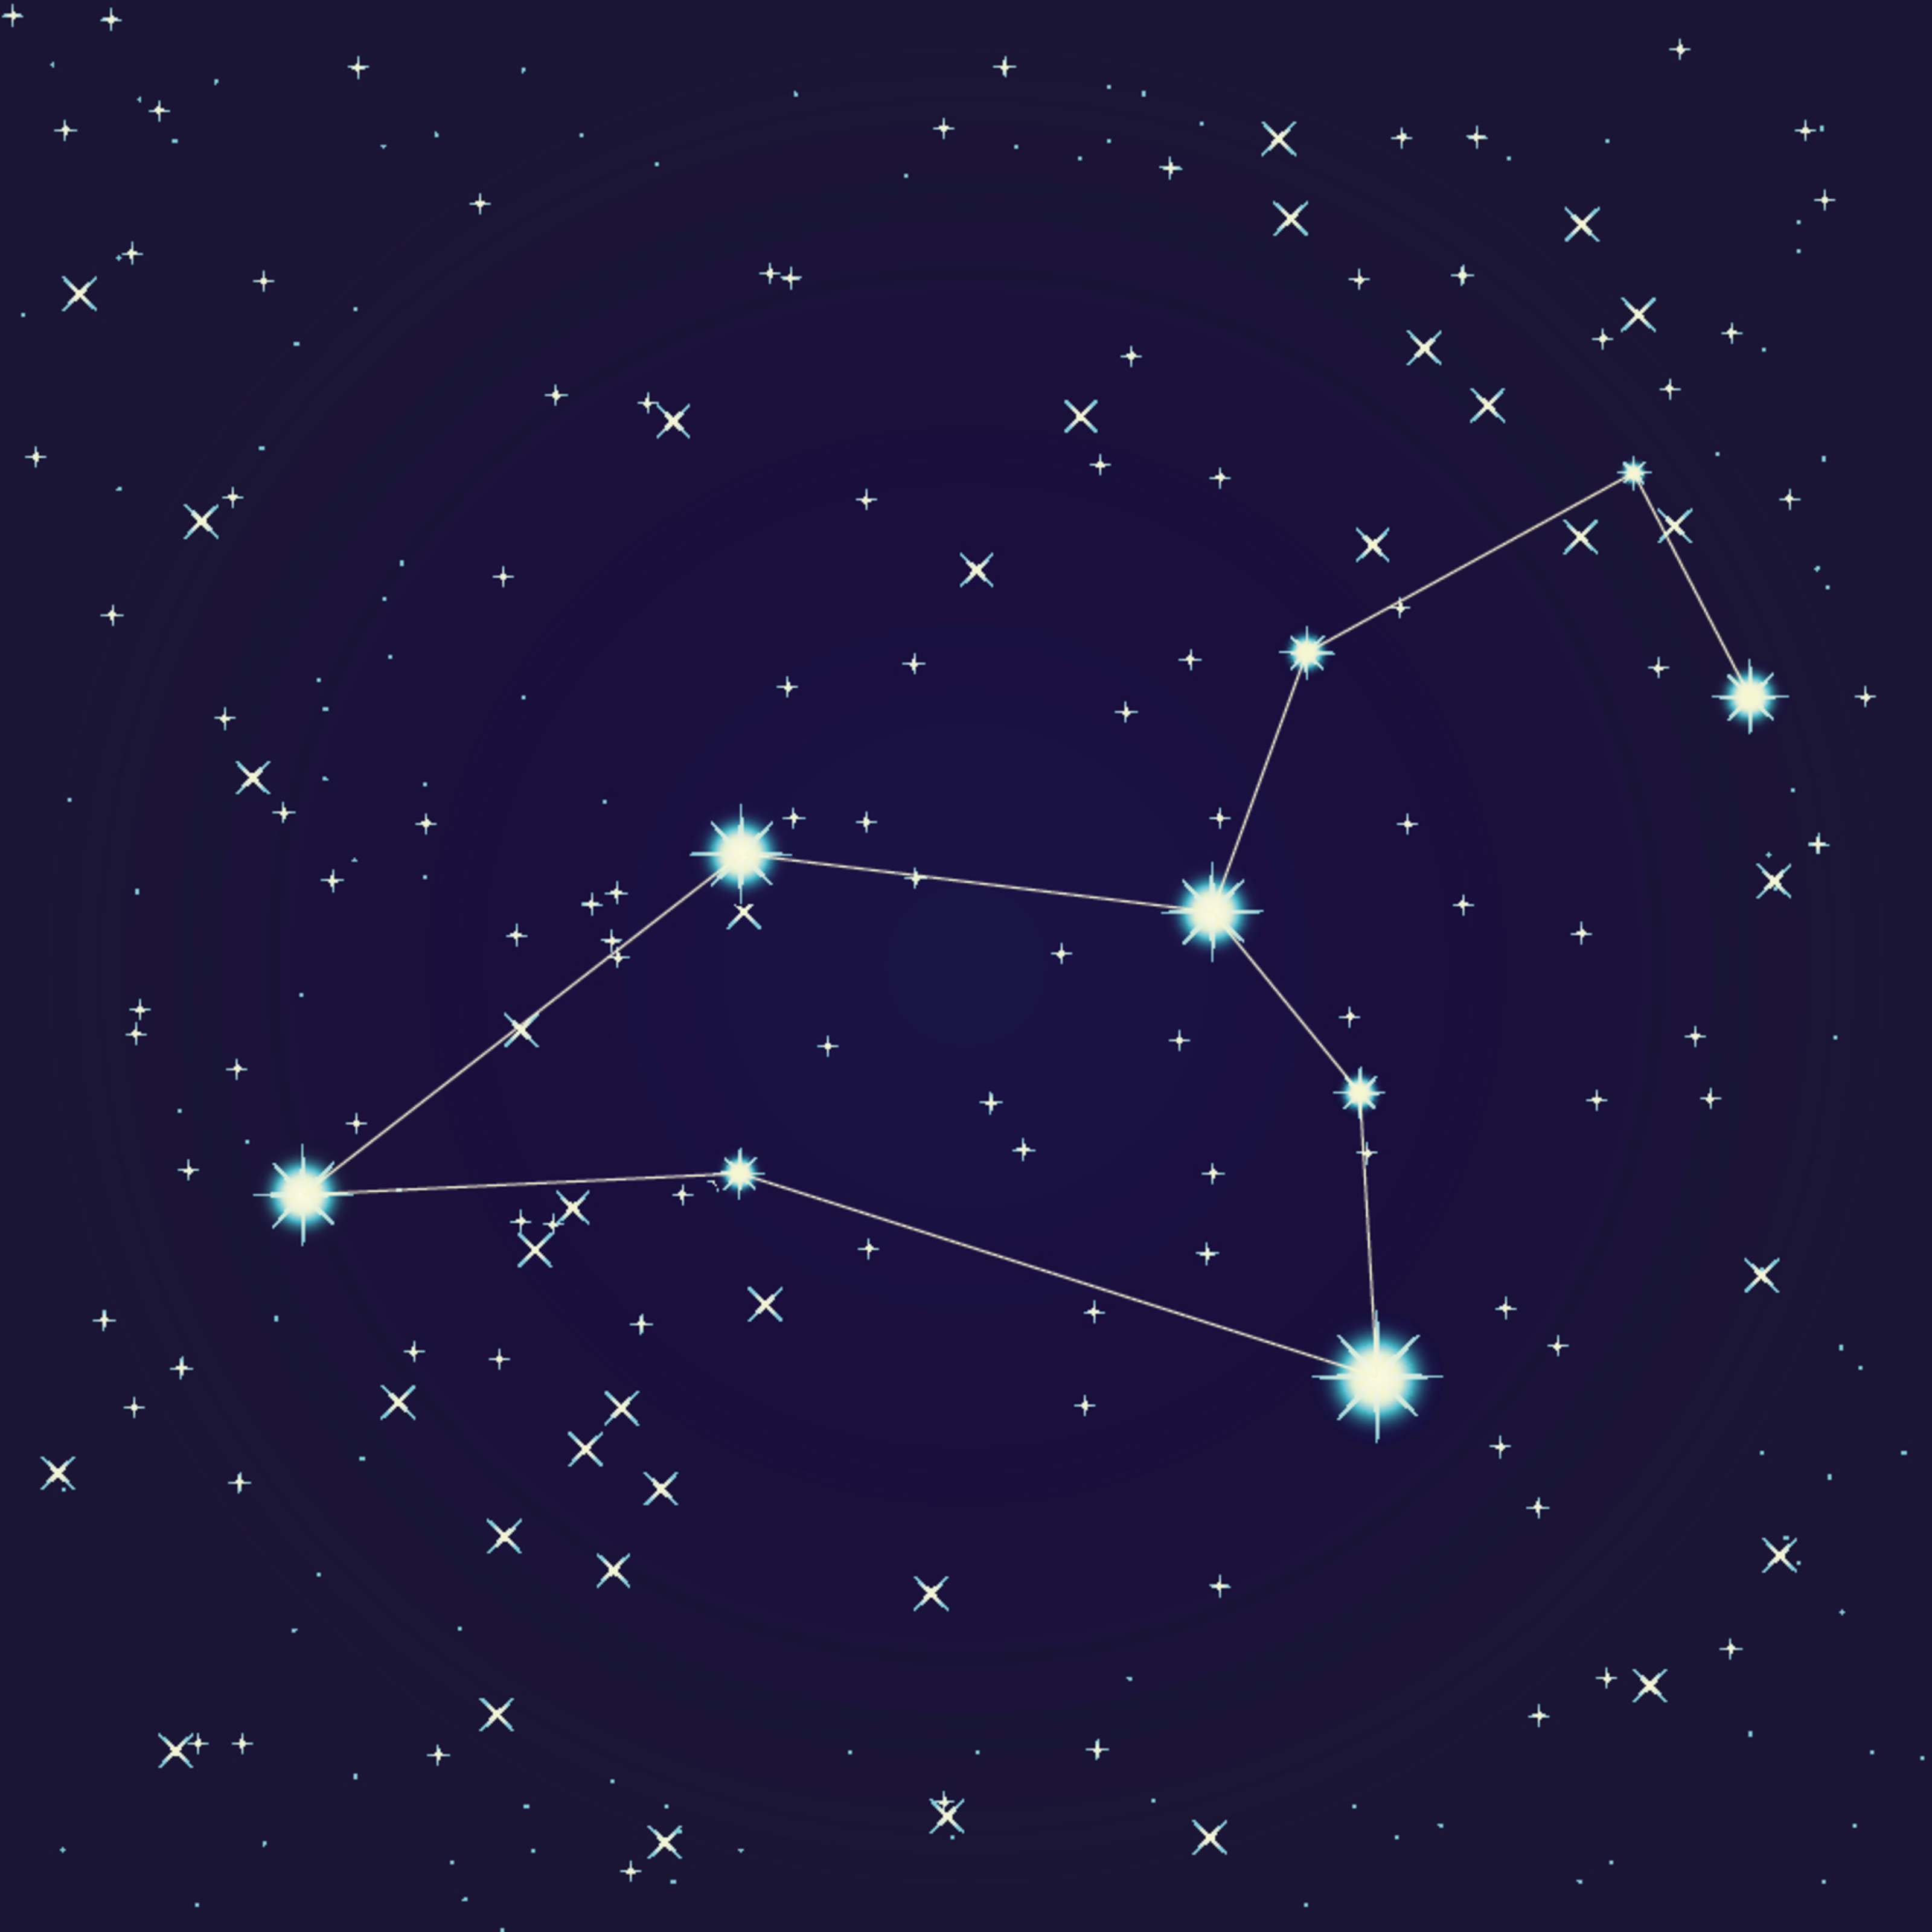 Cancer Constellation Mural - Murals Your Way